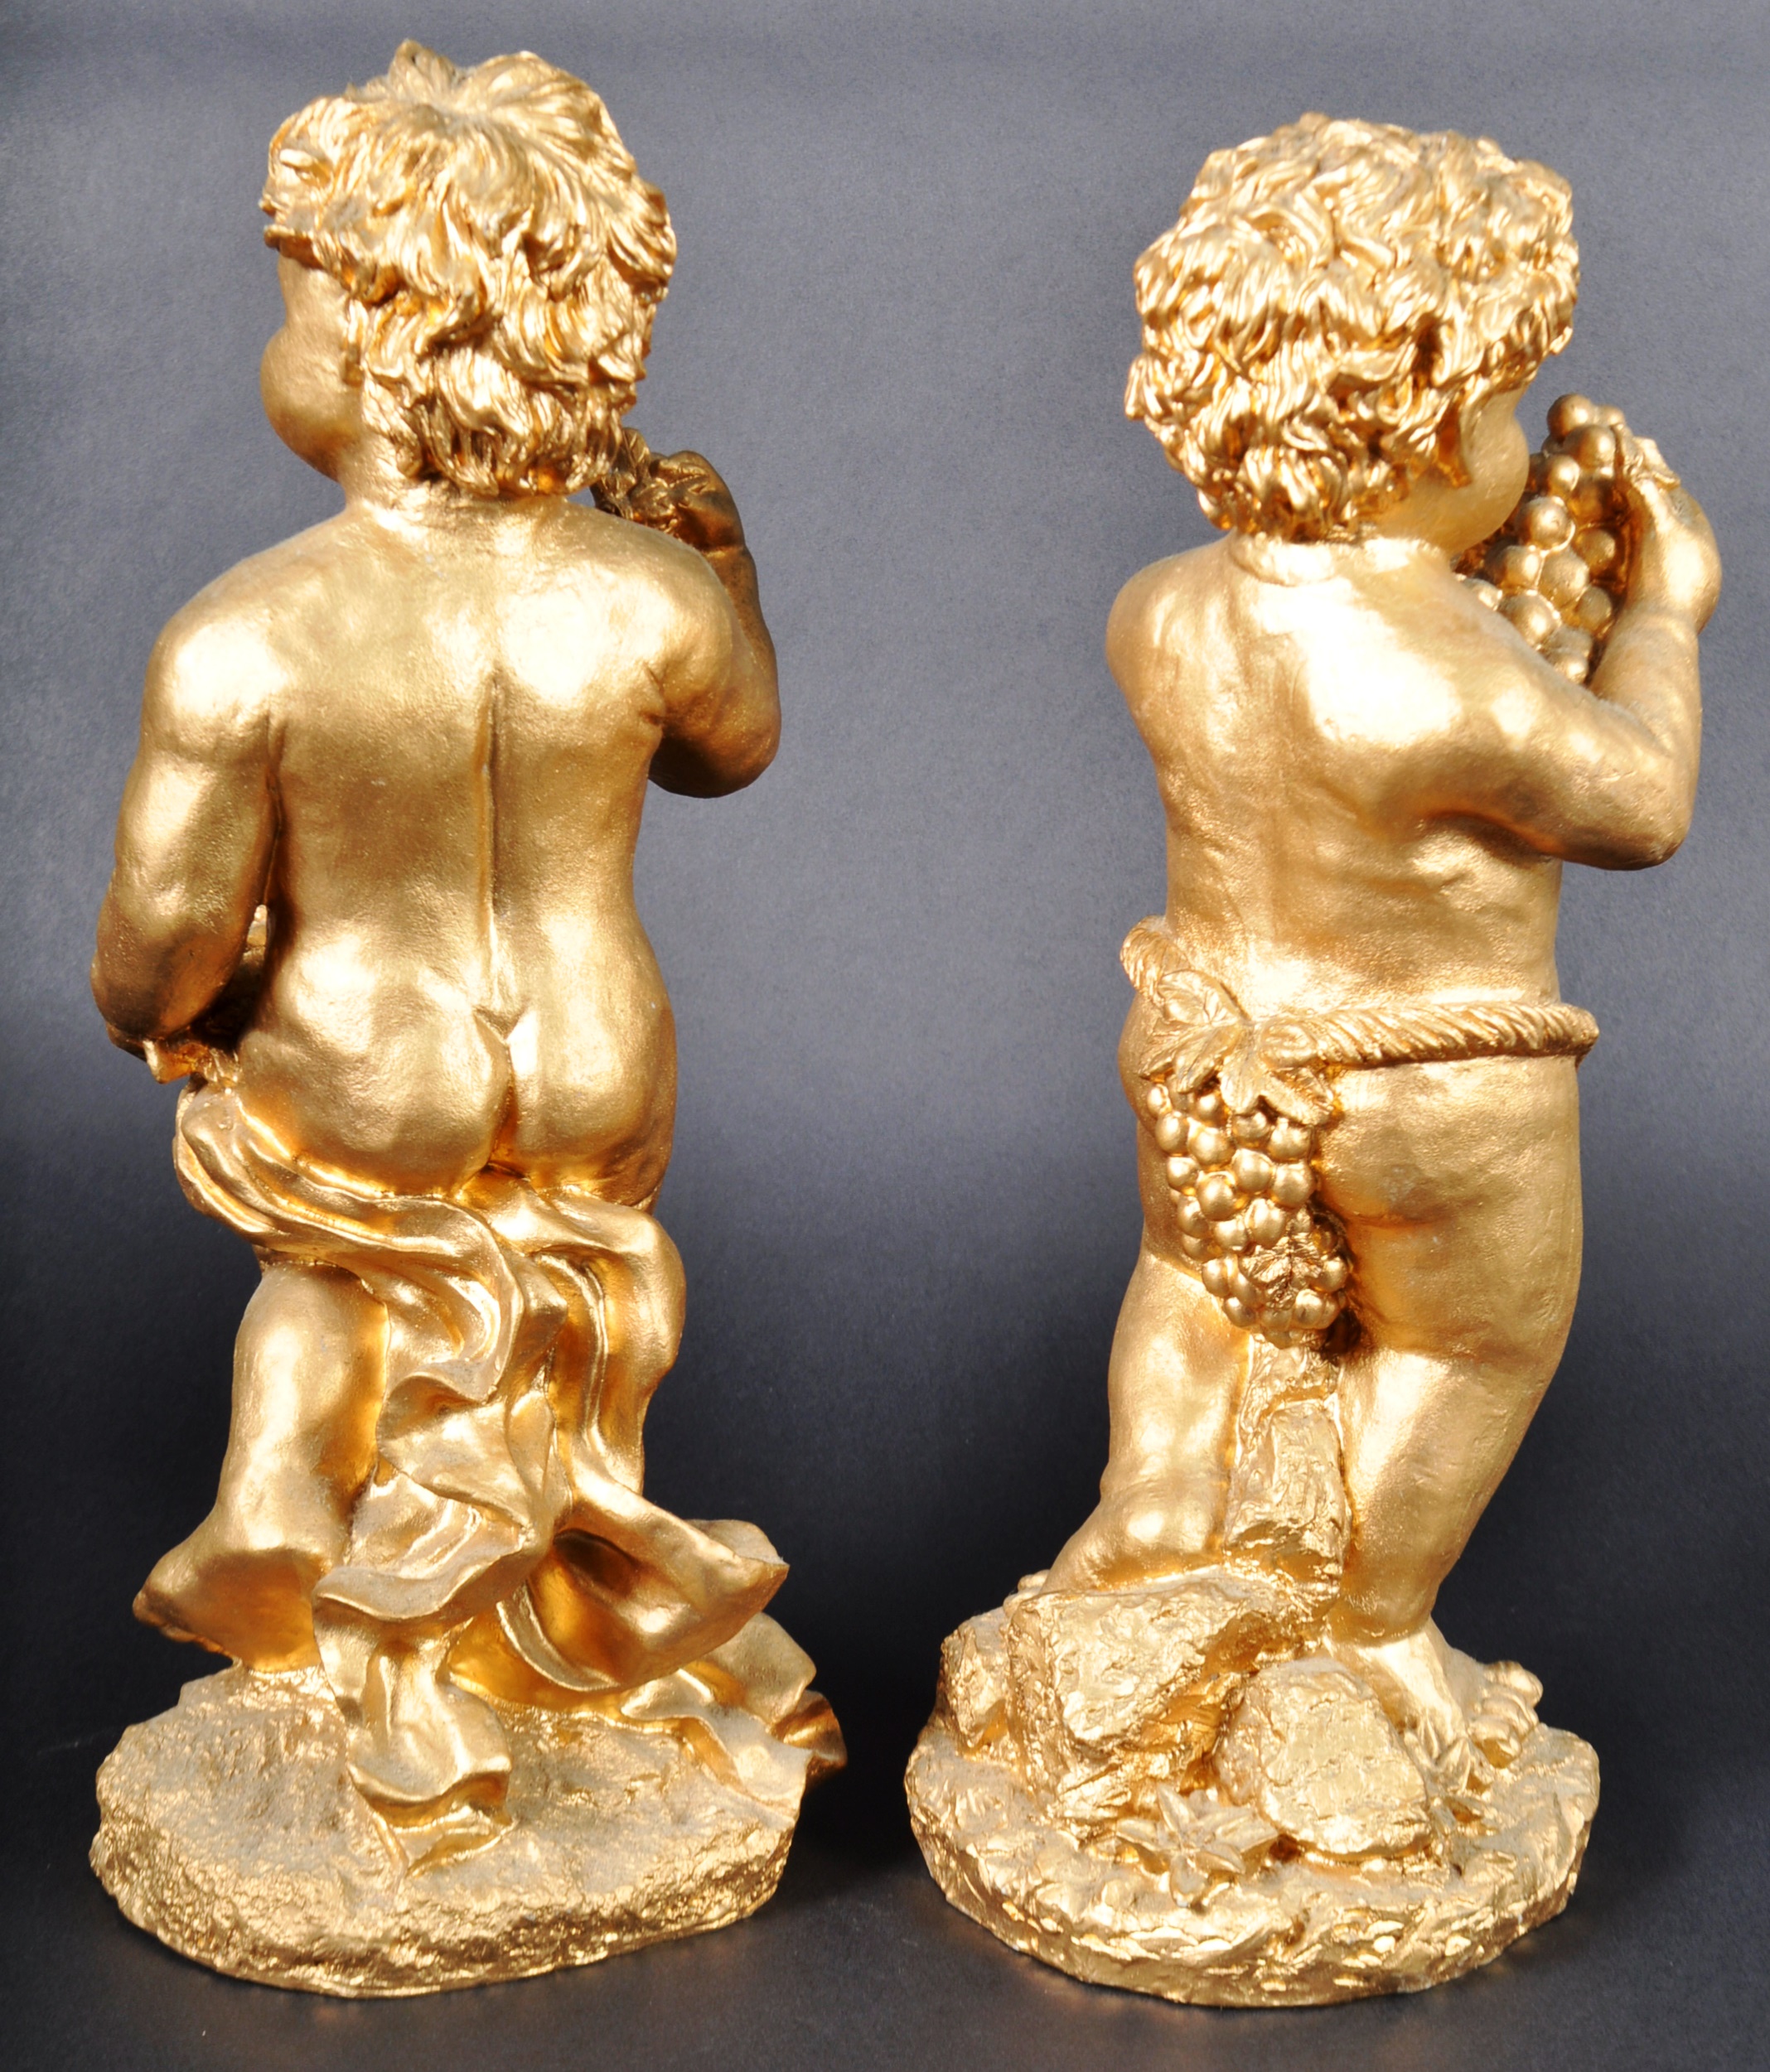 PAIR OF CONTEMPORARY GILT RESIN FIGURES MOULDED AS CHERUBS - Image 9 of 10